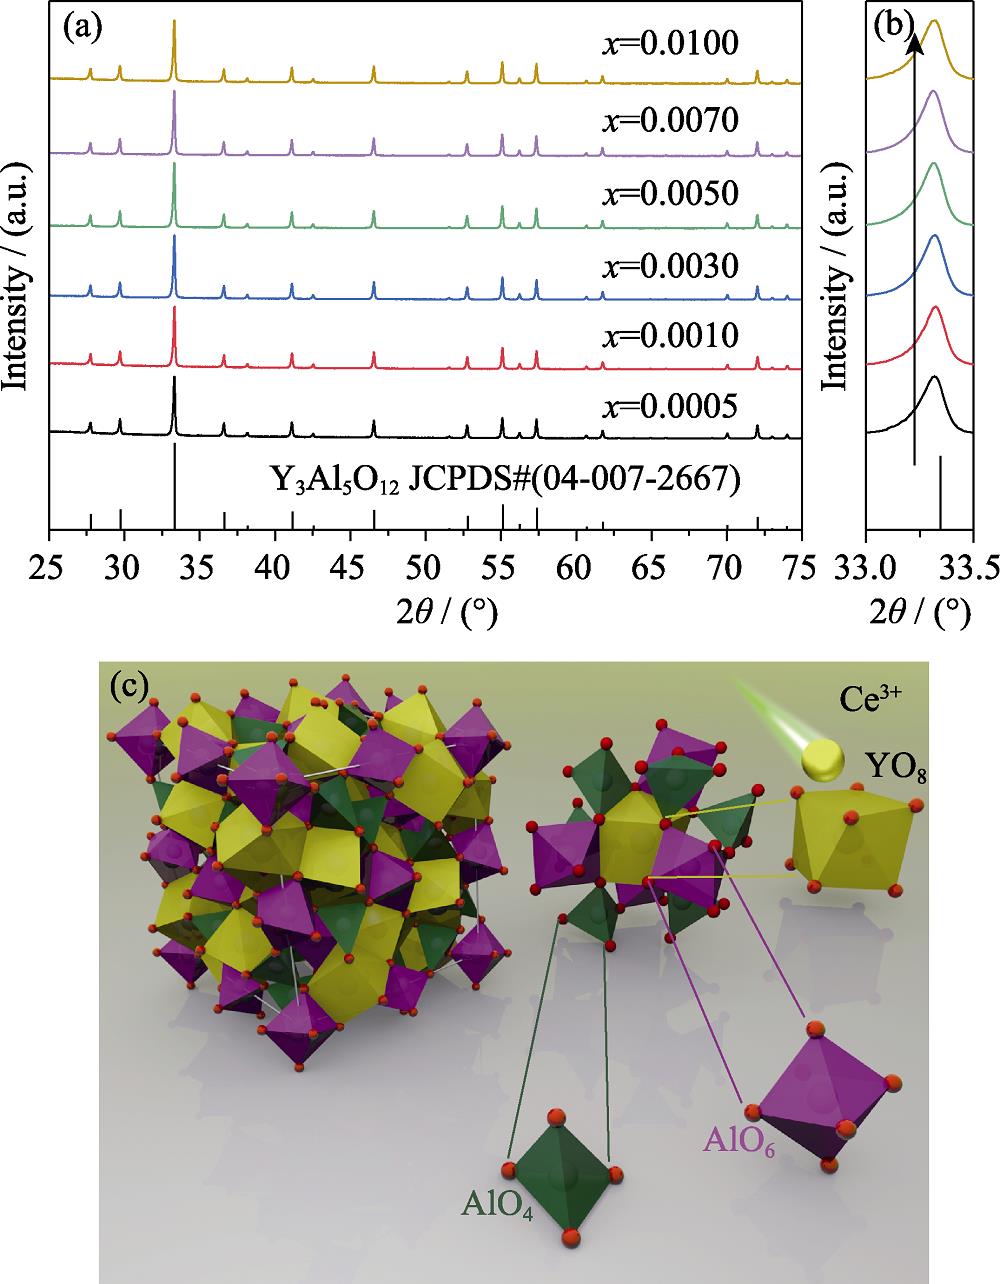 XRD patterns (a) of (CexY1-x)3Al5O12 transparent ceramics smashed into powder, expanded view (b) of 2θ diffraction peaks between 33.0° and 32.5°, and illustration of Ce:YAG crystalline structure and the coordinated environments (c) of YO8 dodecahedron, AlO4 tetrahedra, and AlO6 octahedra based on JCPDS #04-007-2667